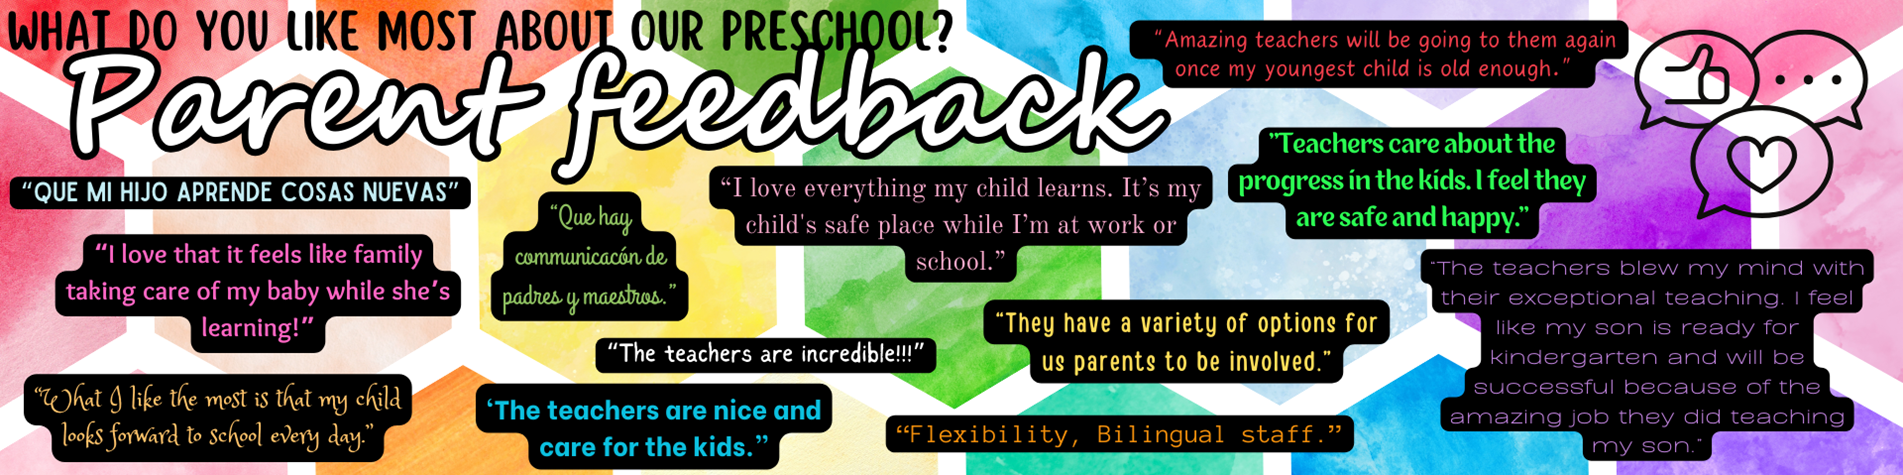 Feedback from the parent survey